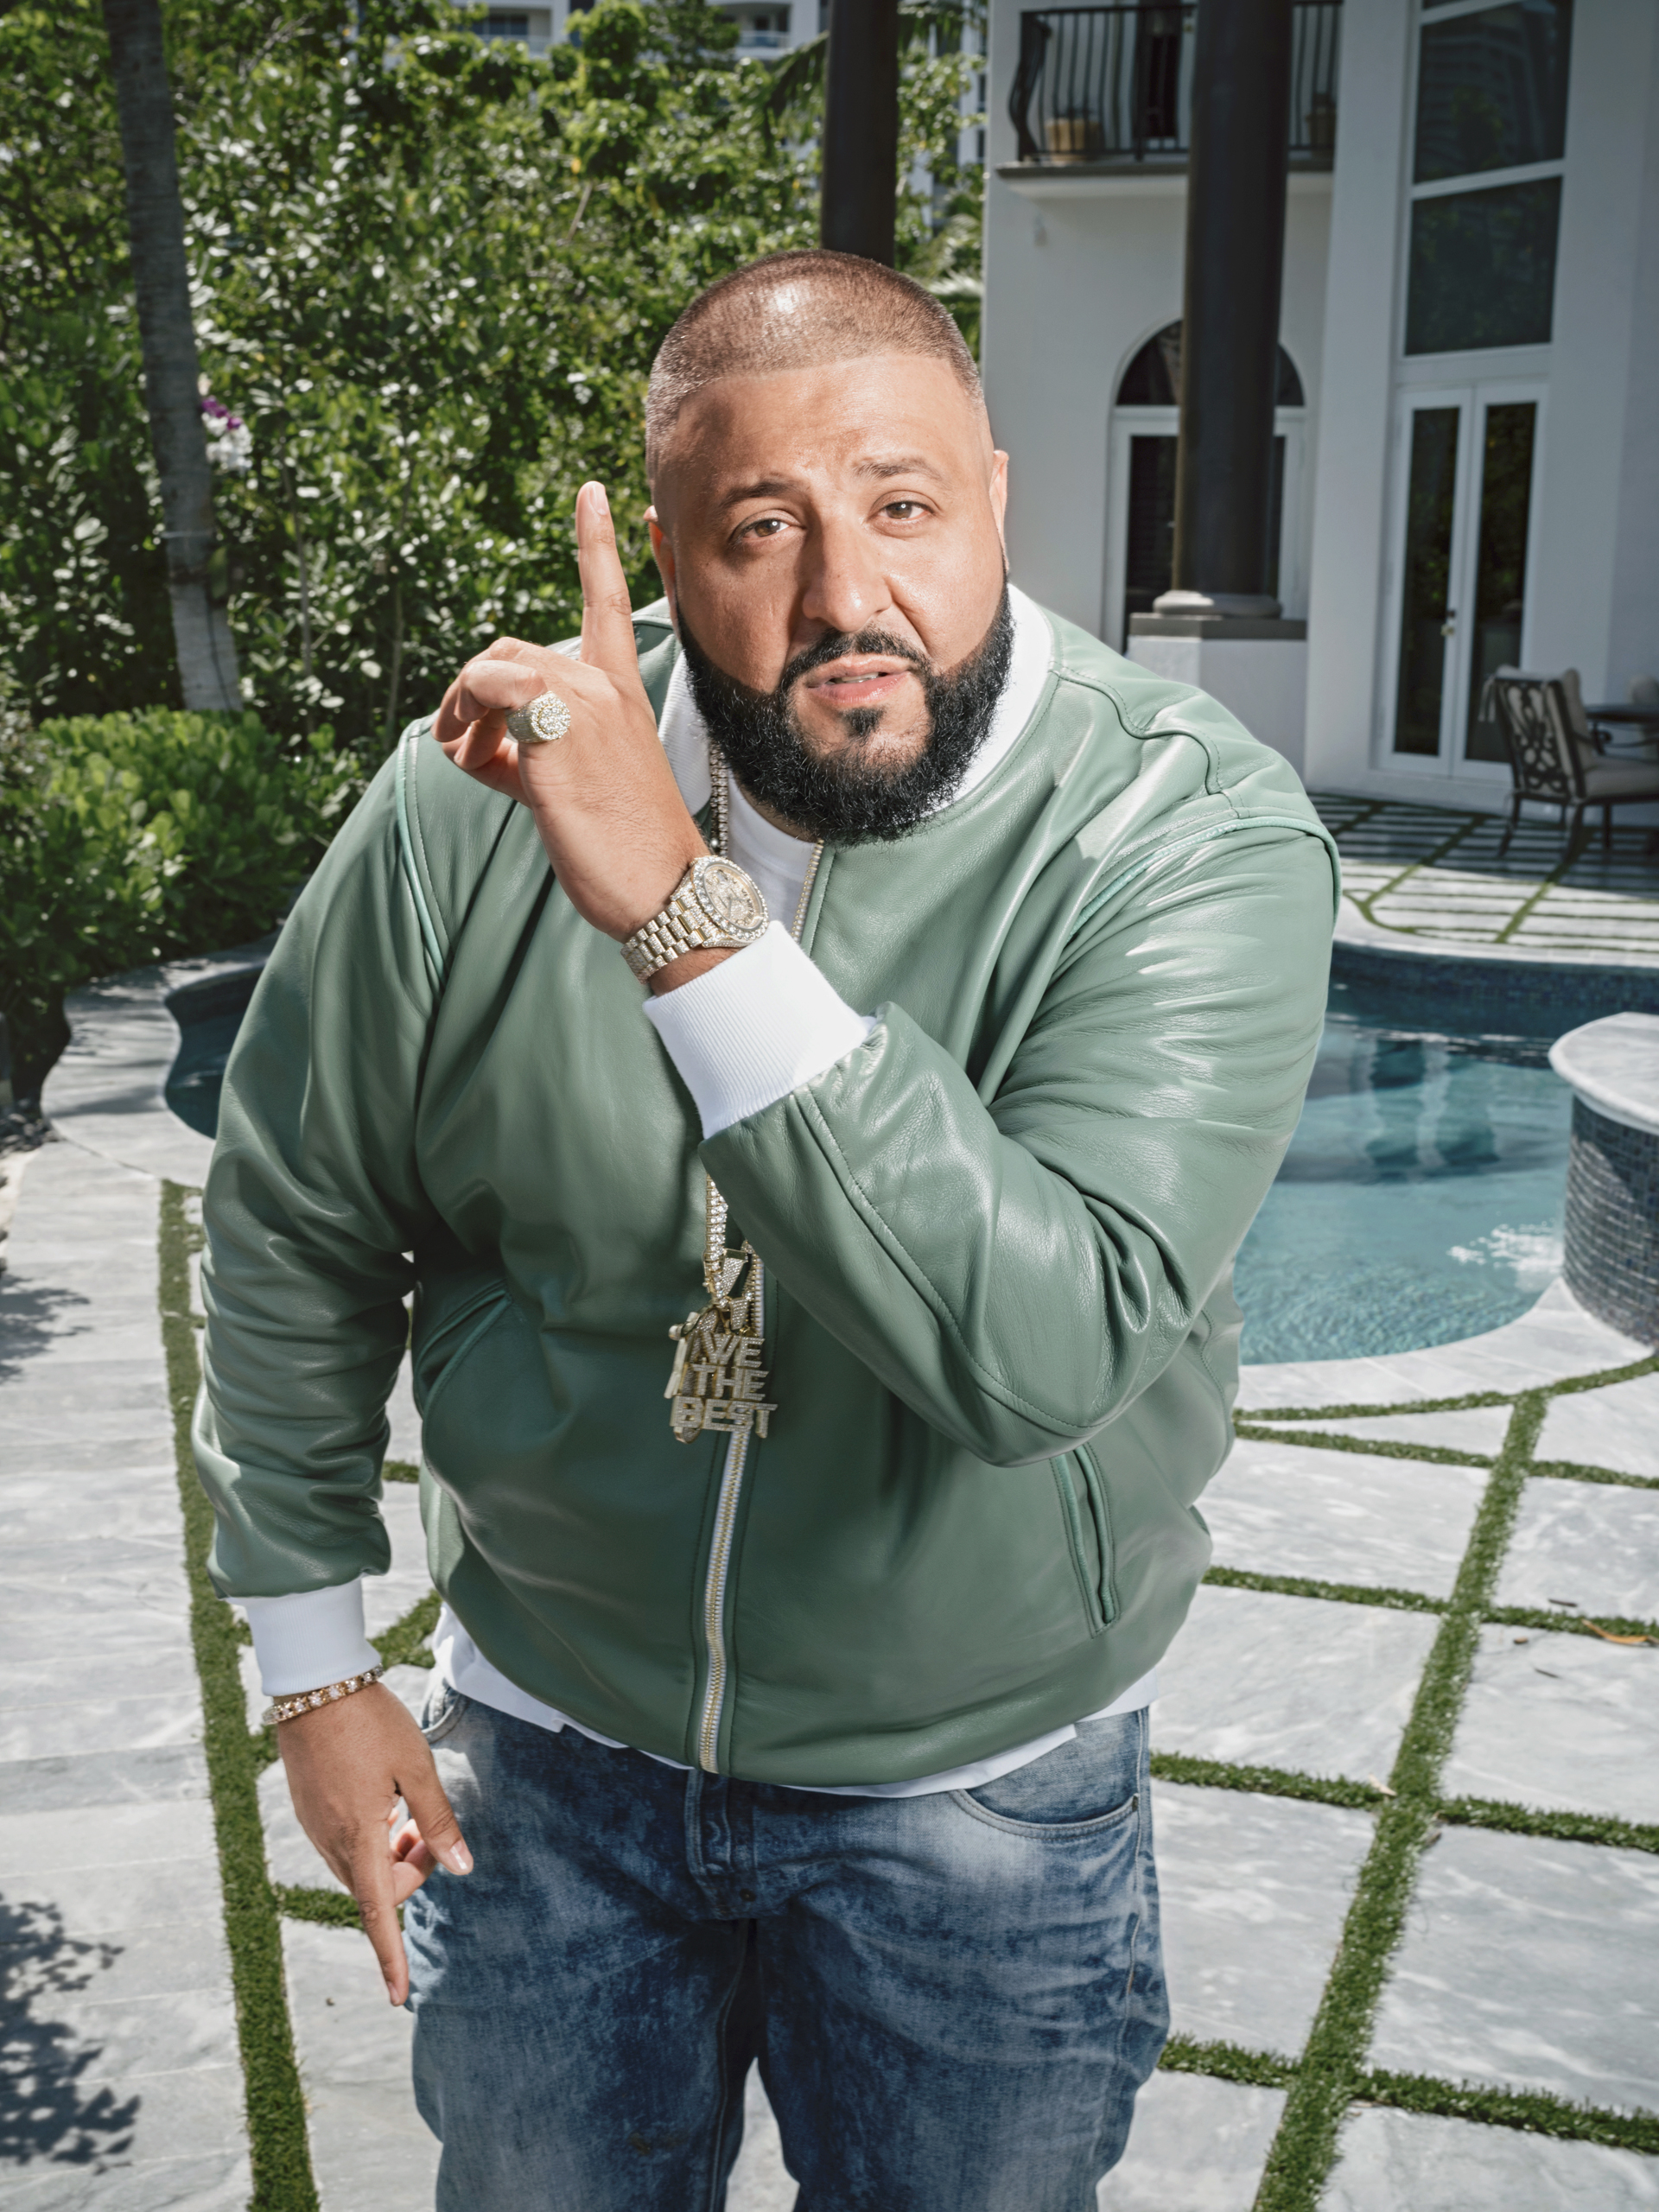 DJ Khaled, photographed in Miami, has transitioned from hip-hop star to viral guru (Photography by Wayne Lawrence for TIME)